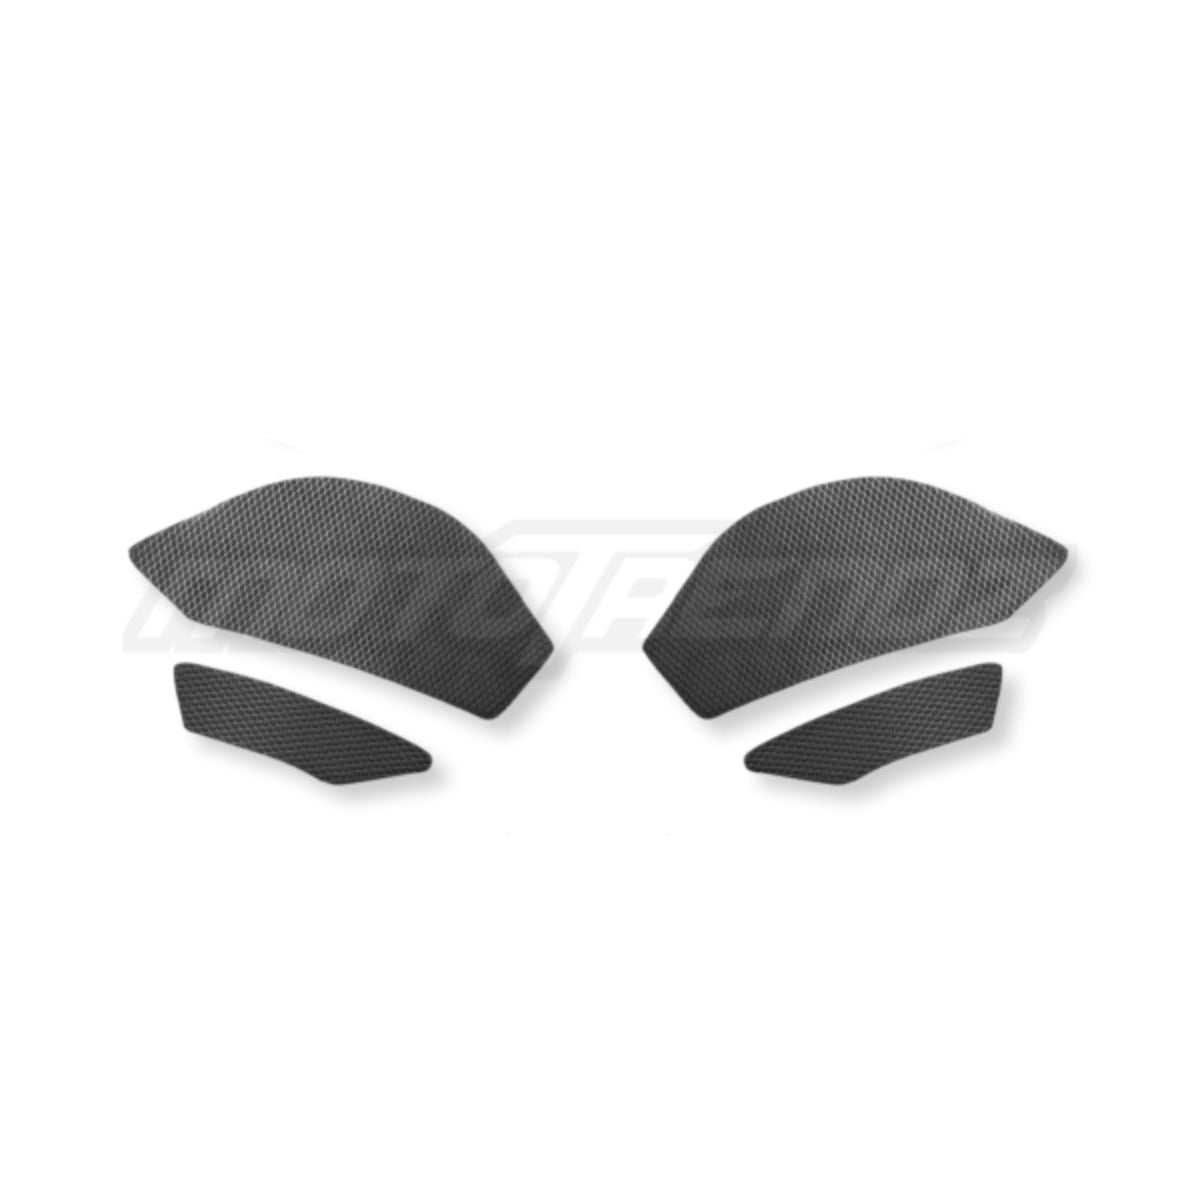 Traction Pads for Kawasaki ZX 6 R 4